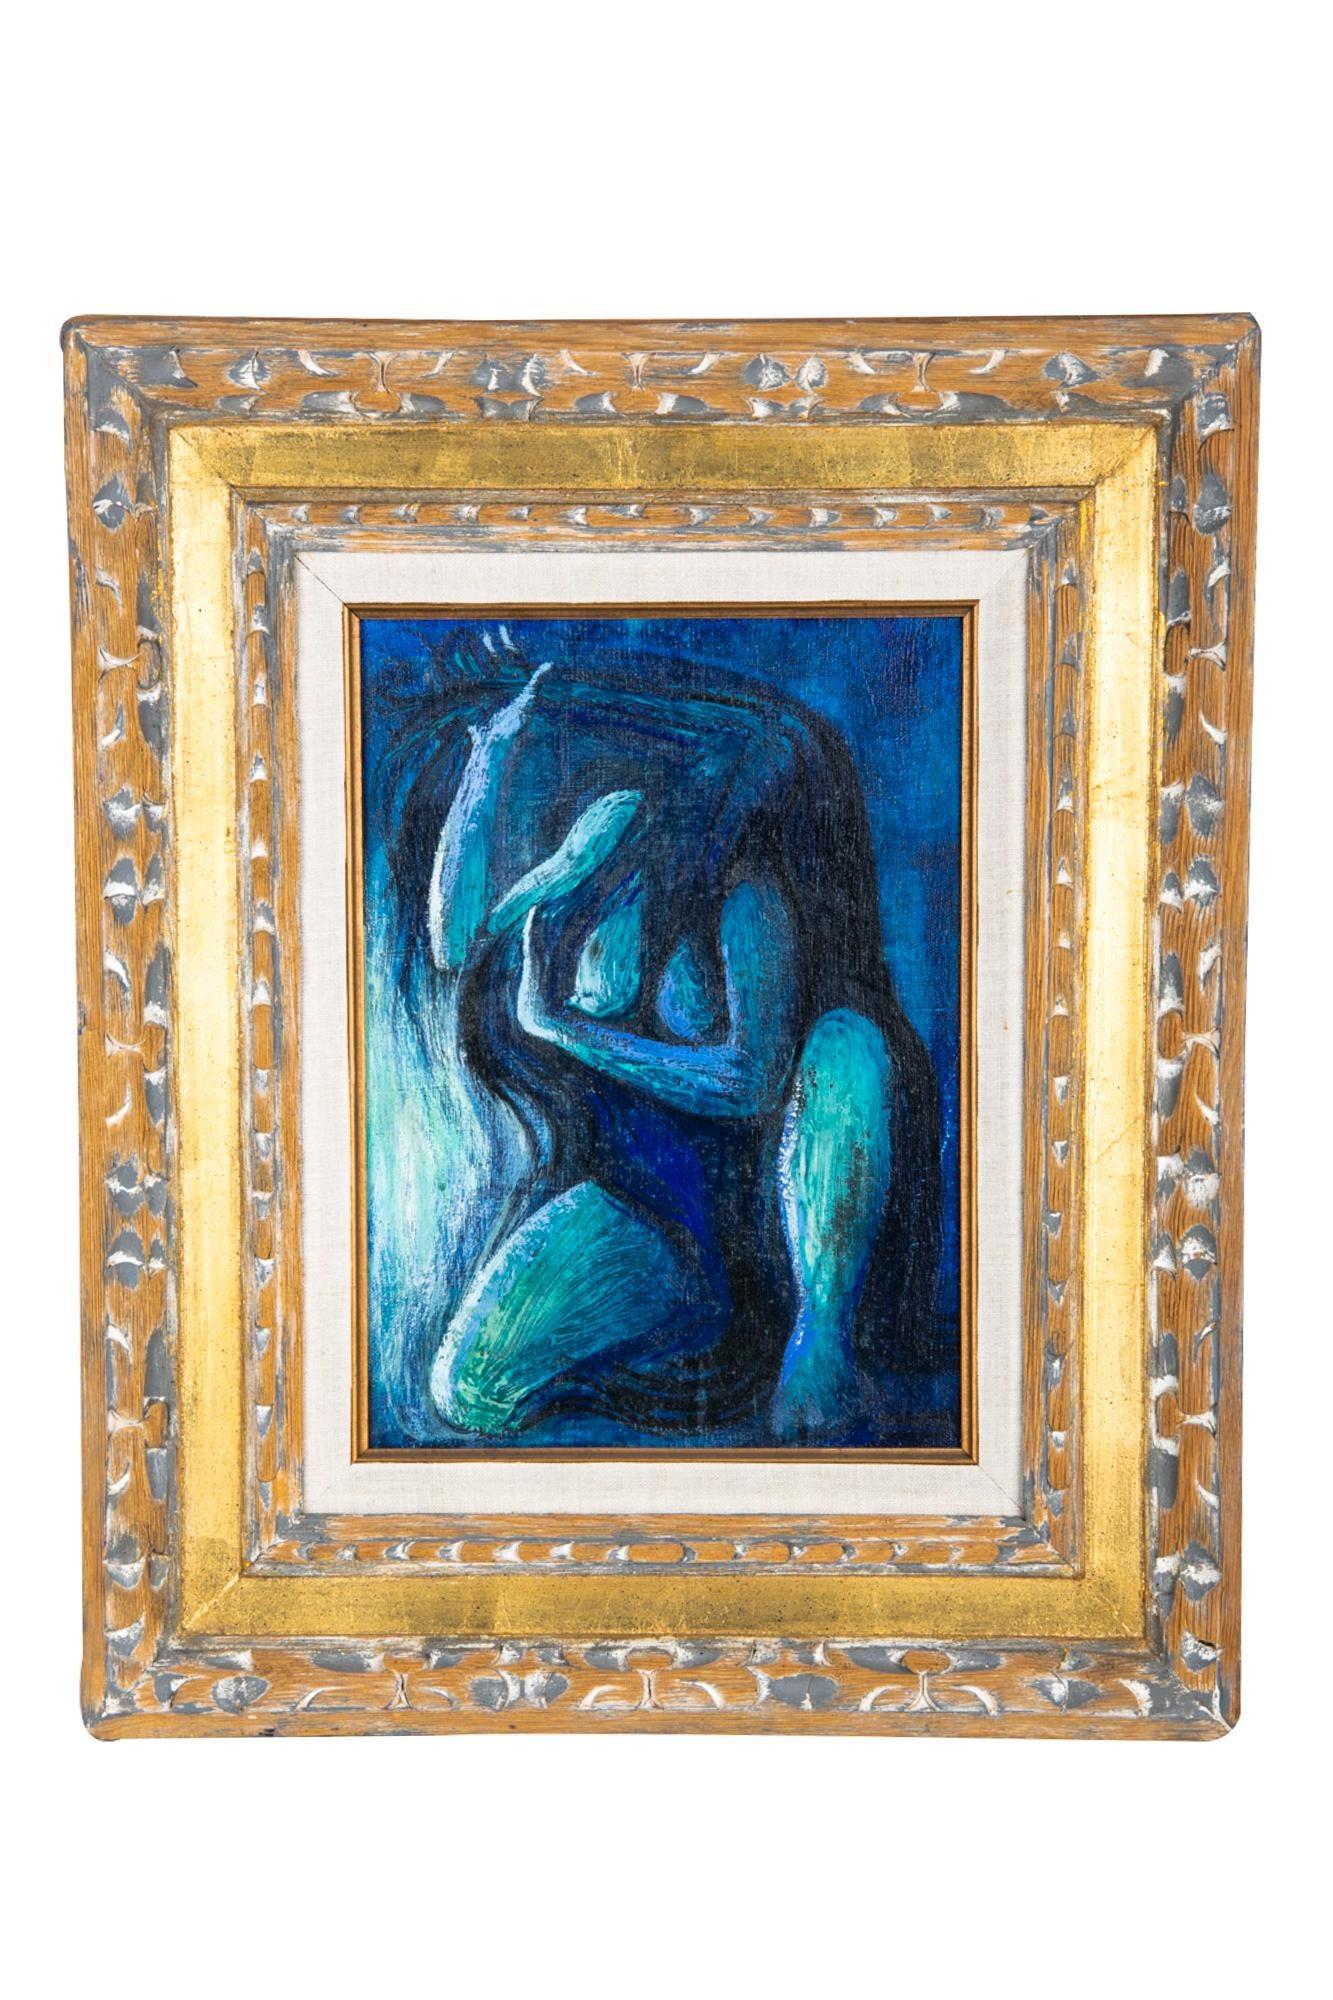 Beautifully framed oil on canvas representing a blue figure.

Size: 13 3/4 x 9 3/4 inches canvas, 22 1/8 x 18 1/2 inches frame.